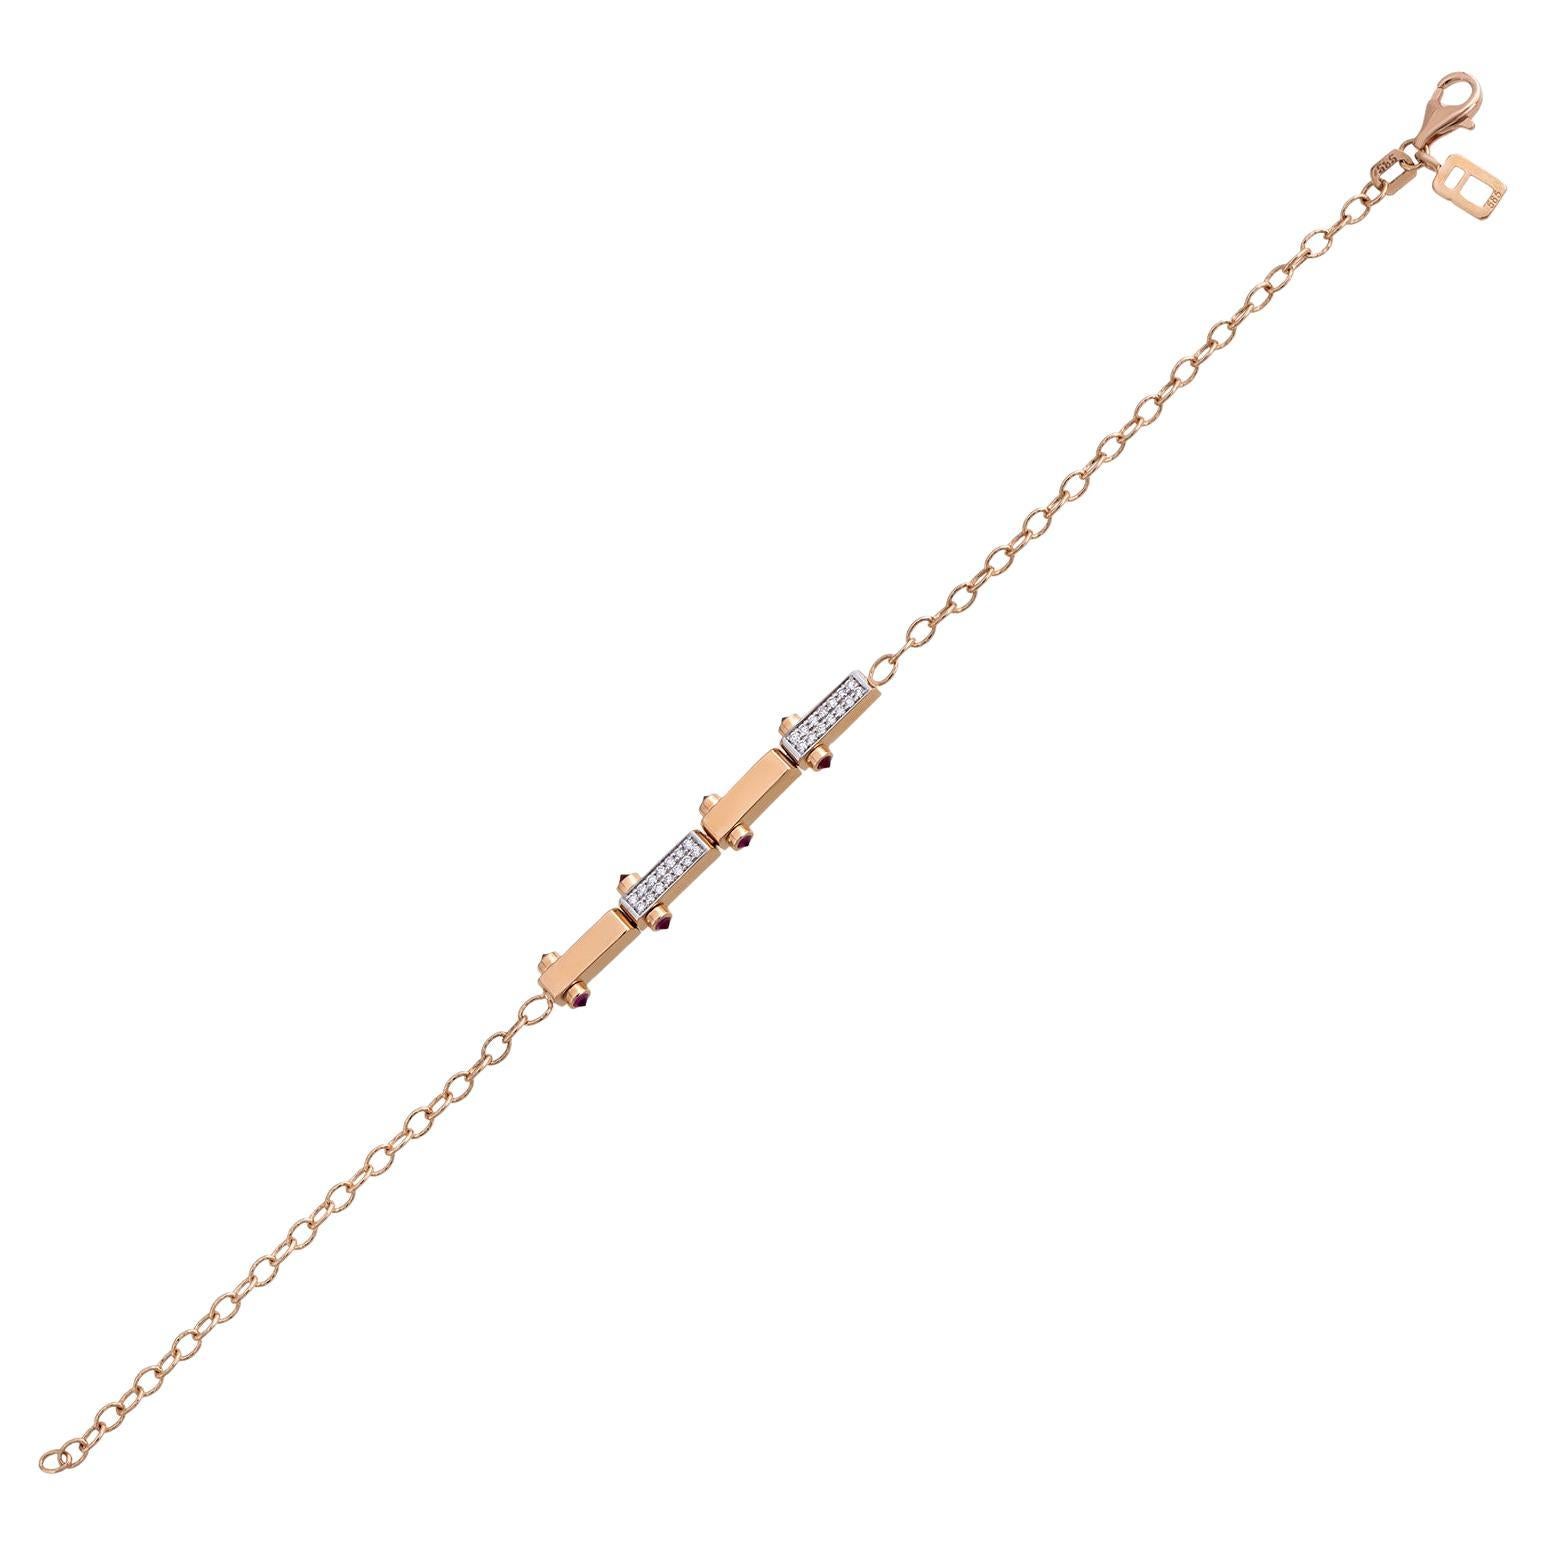 Baguette Jewellery 14K Rose Gold Bar Bracelet with Diamonds and Ruby Cabochon